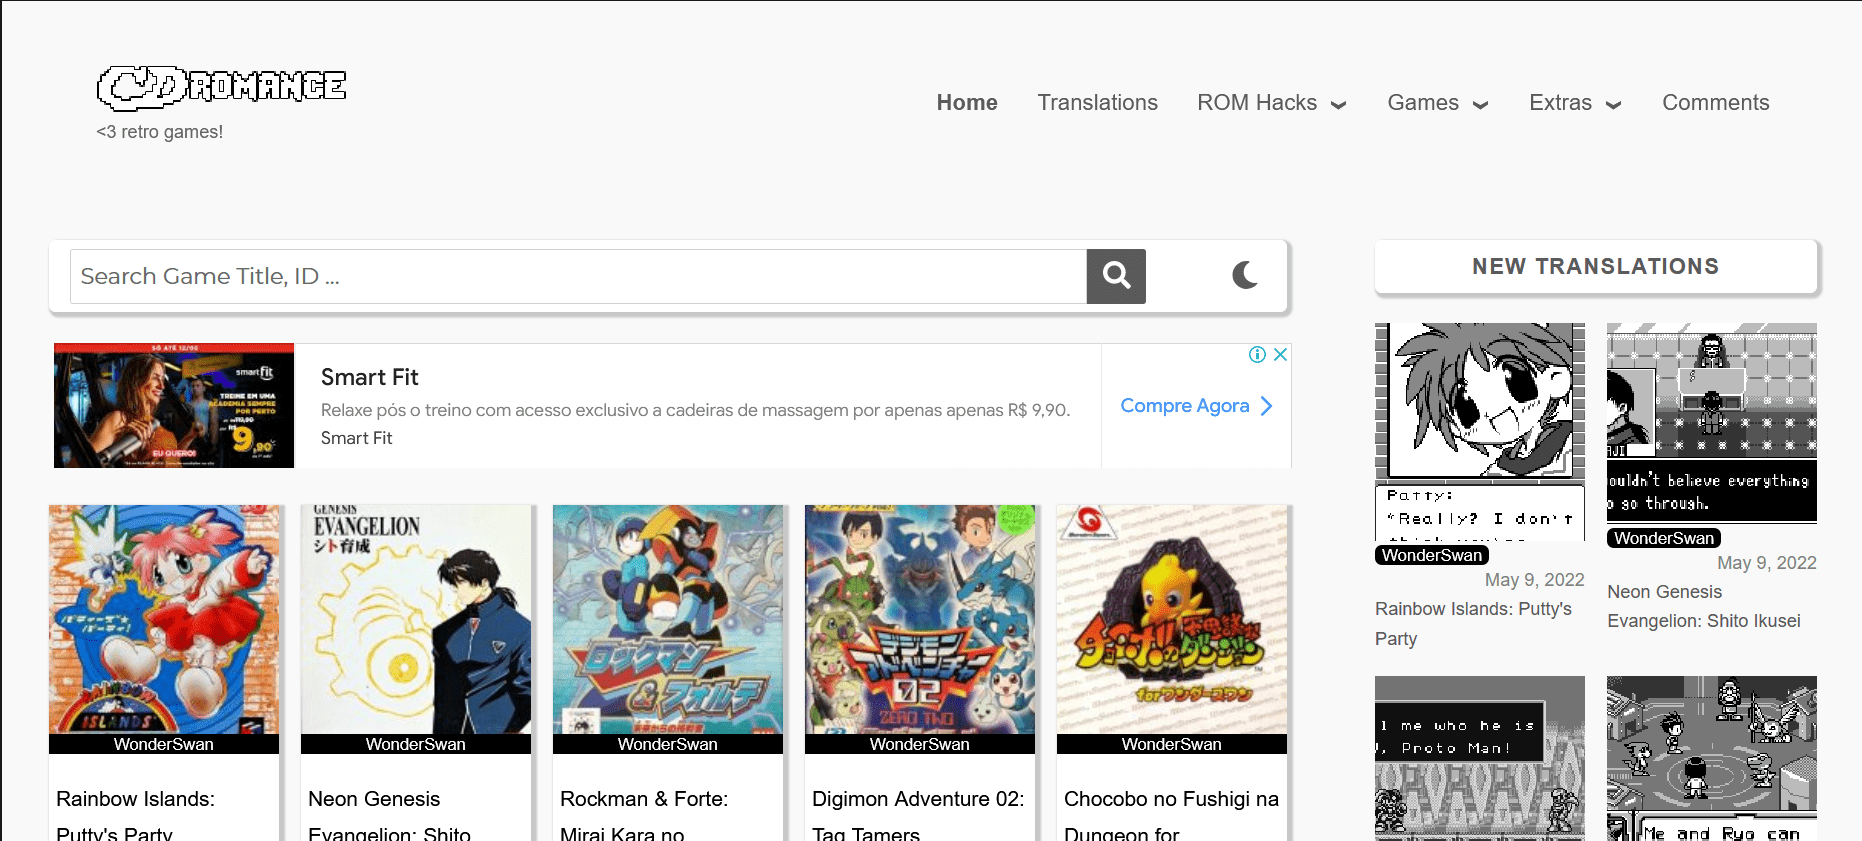 All of the Nintendo ROMs linked to from the megathread appear to